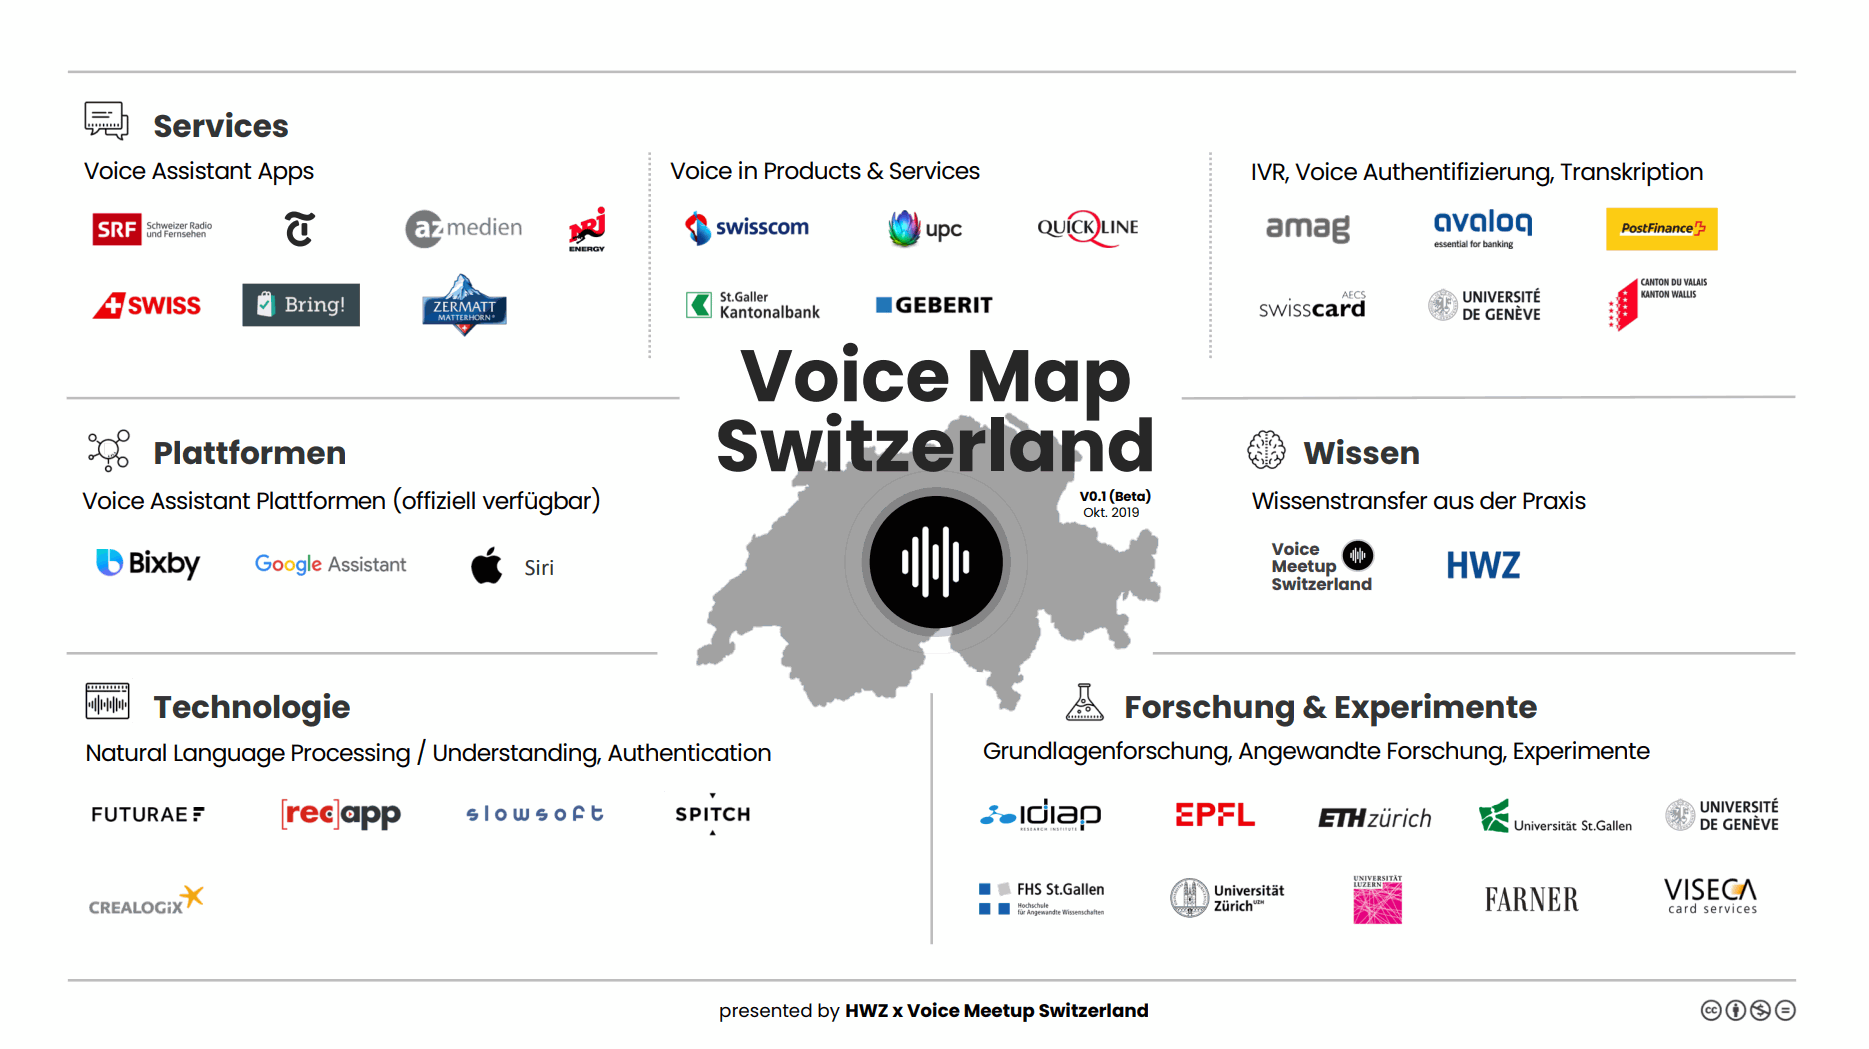 Voicemap Switzerland provides an overview of technologies, services, and research